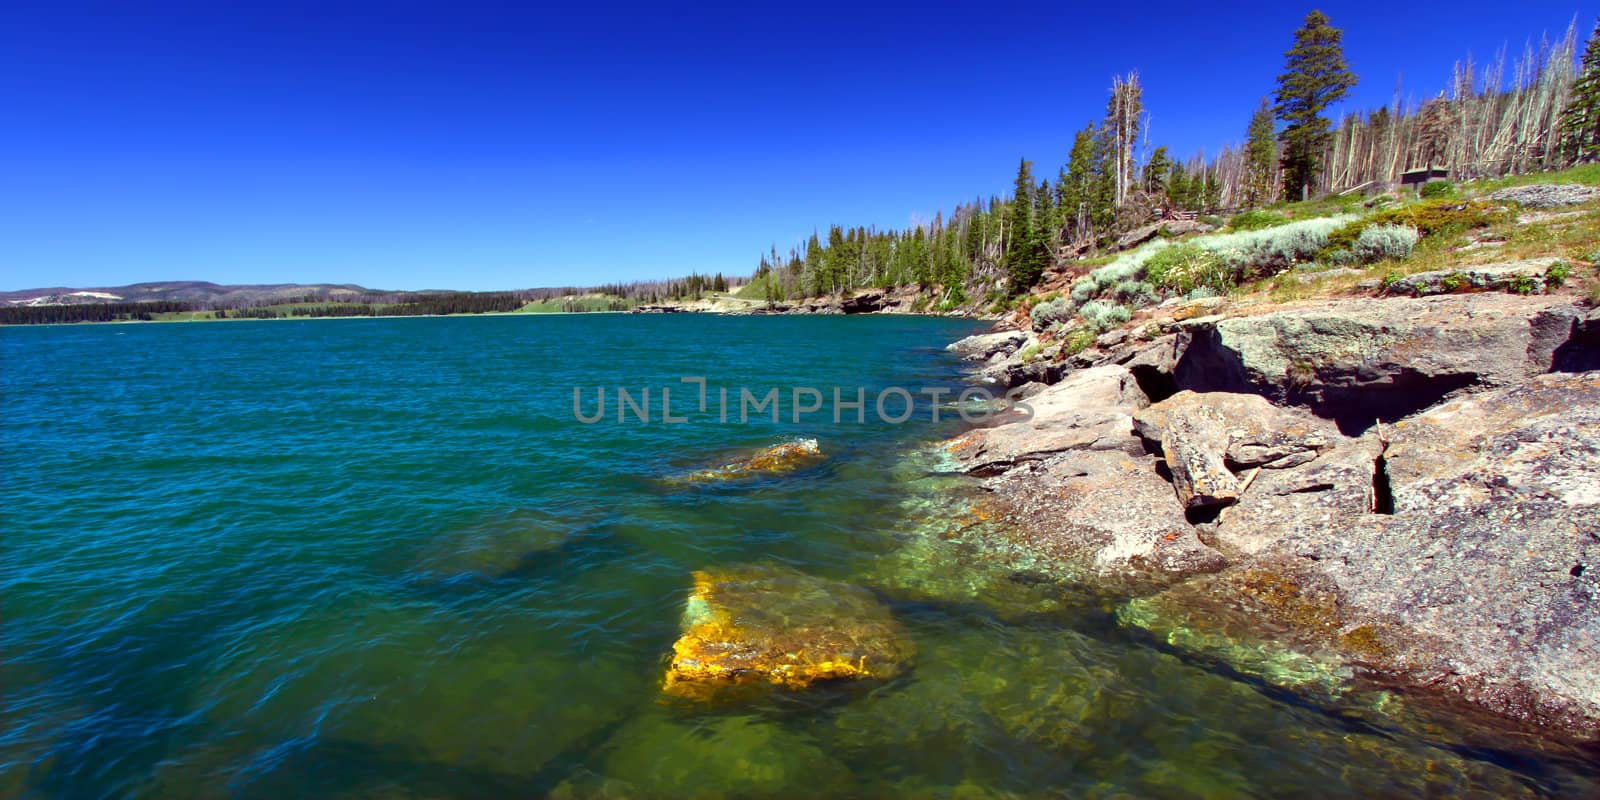 Cold blue waters of Yellowstone Lake on a sunny day in Yellowstone National Park.